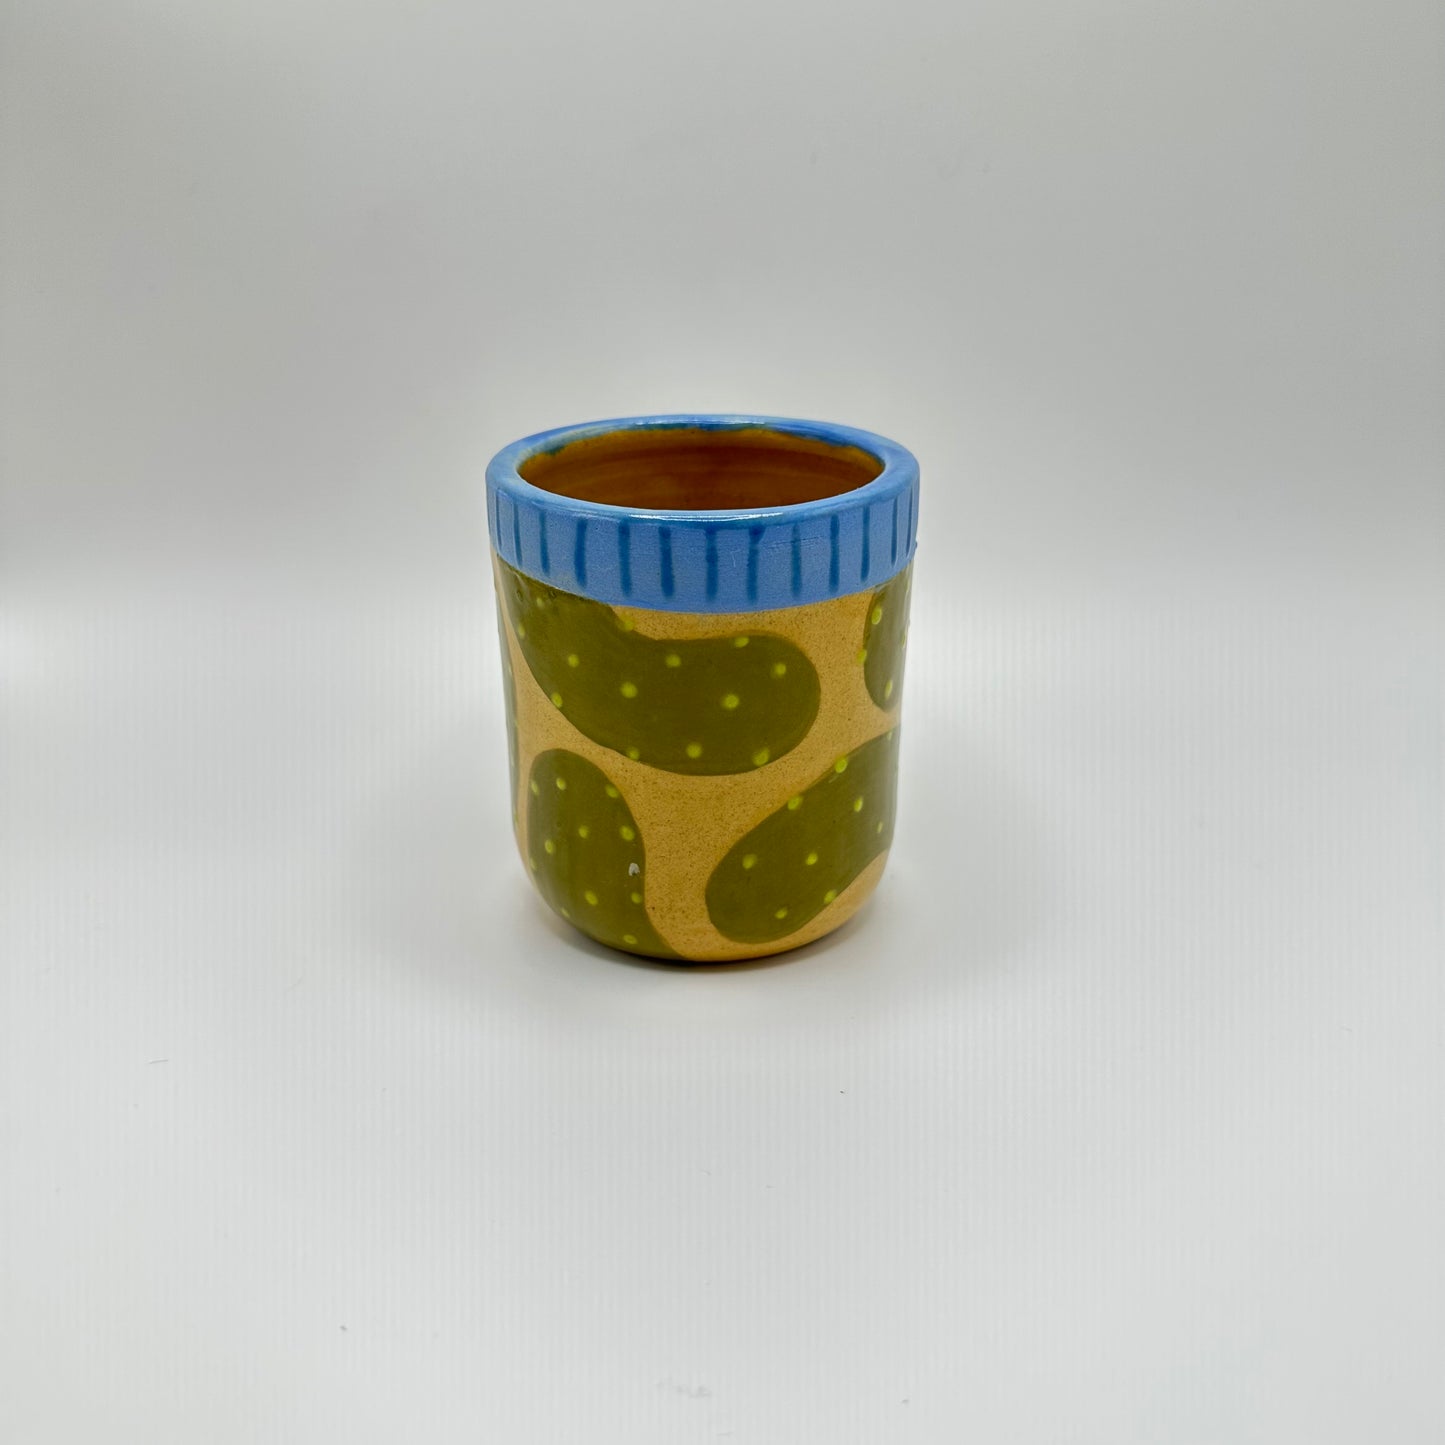 Ceramic Tumbler designed to look like a jar of Kosher Dill Pickles.